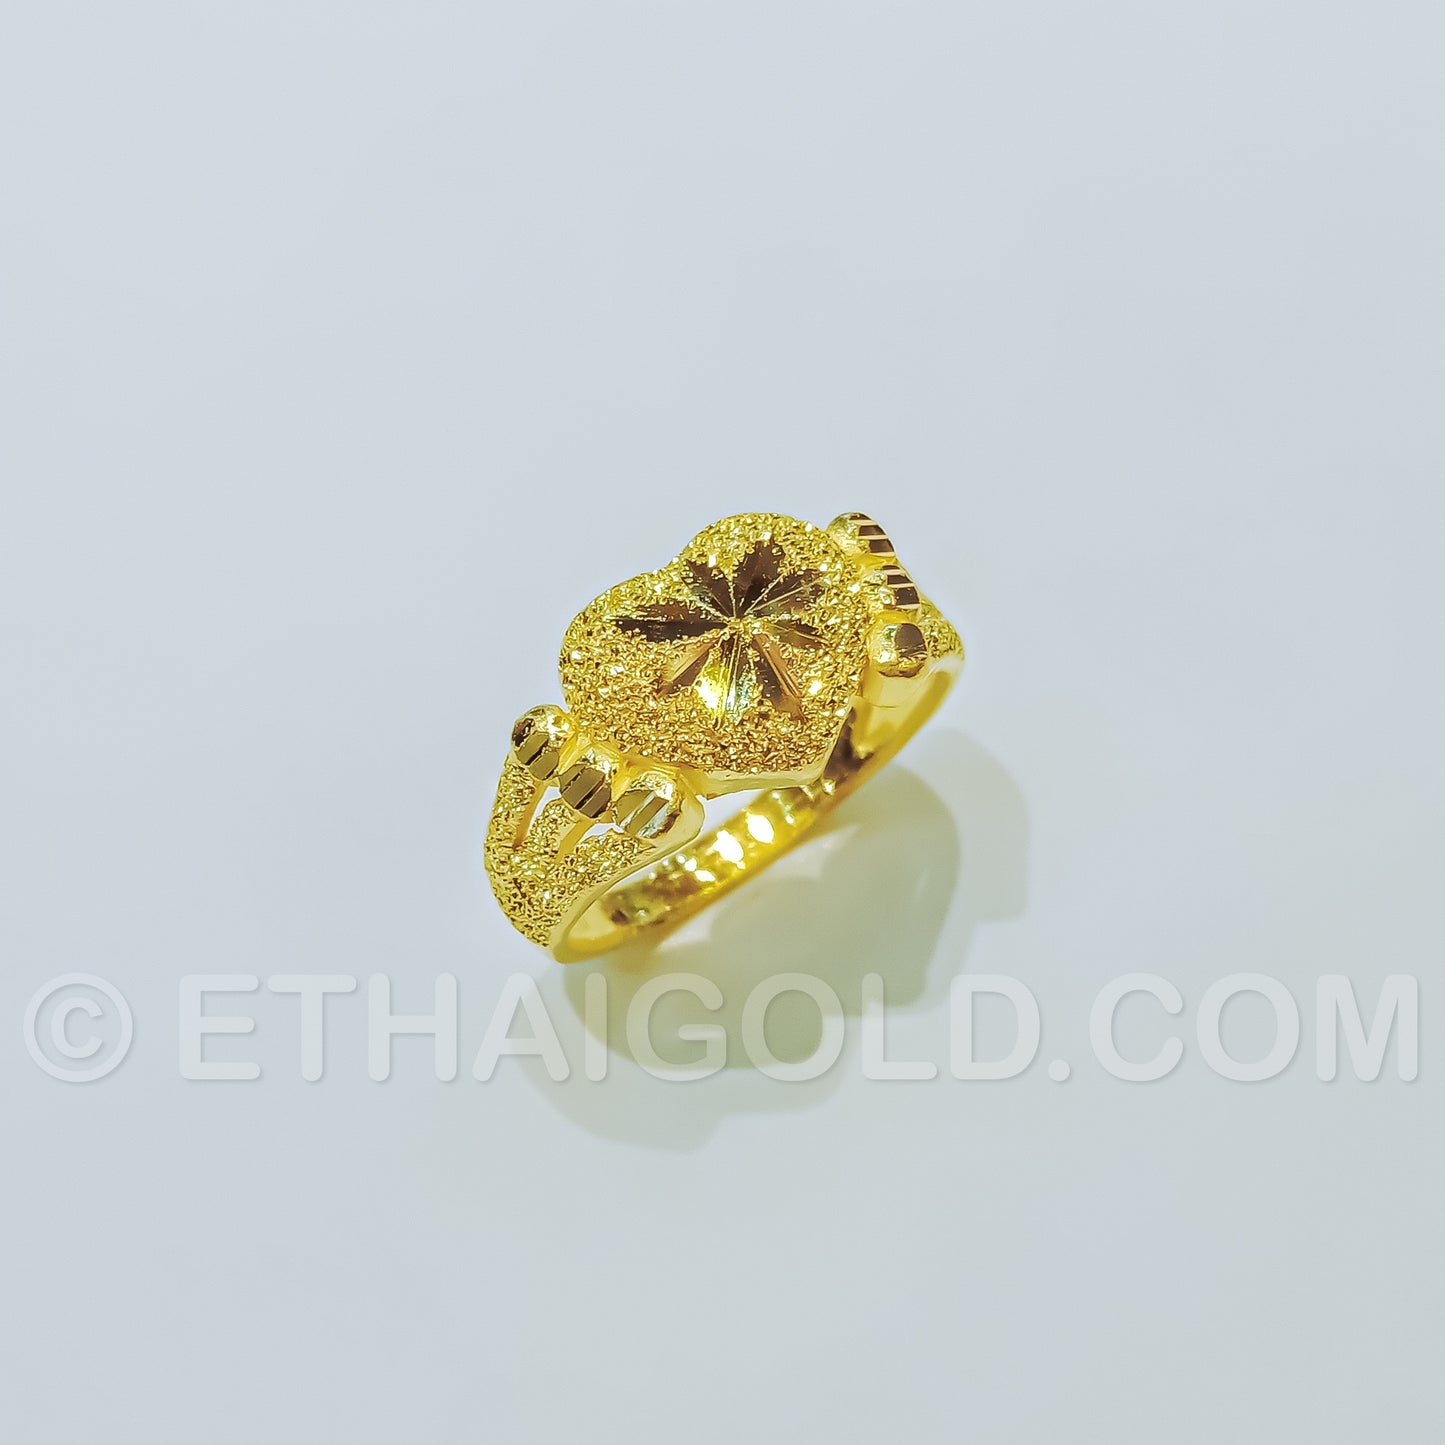 1/8 BAHT POLISHED SPARKLING DIAMOND-CUT SOLID HEART RING IN 23K GOLD (ID: R050HS)